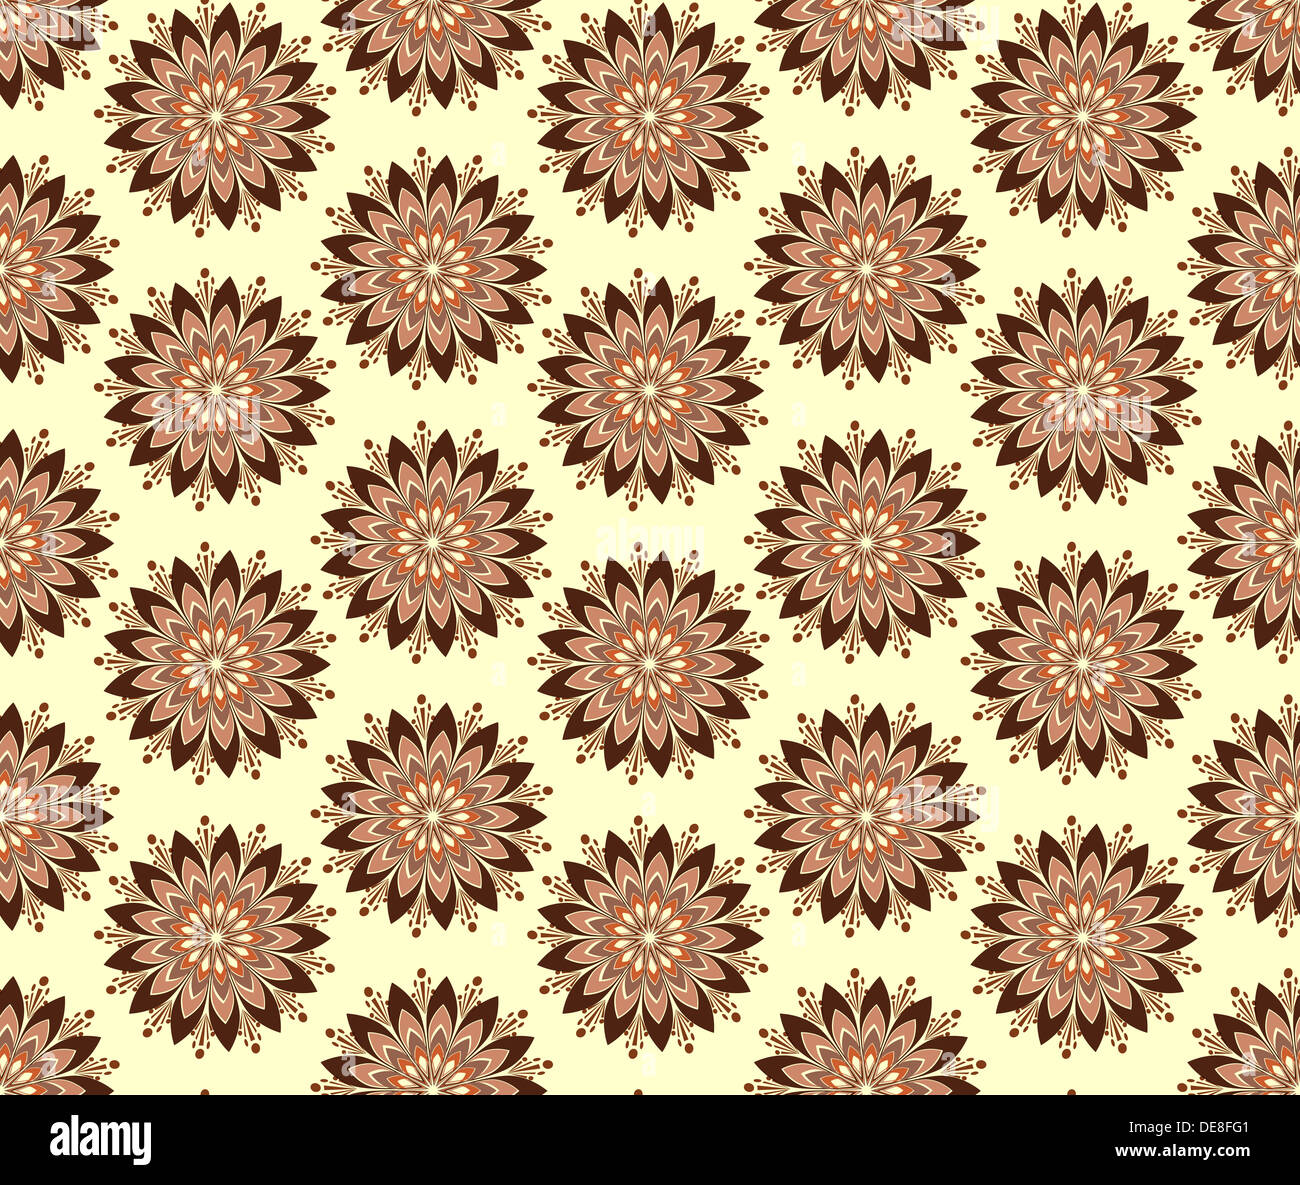 floral abstract seamless pattern illustration Stock Photo